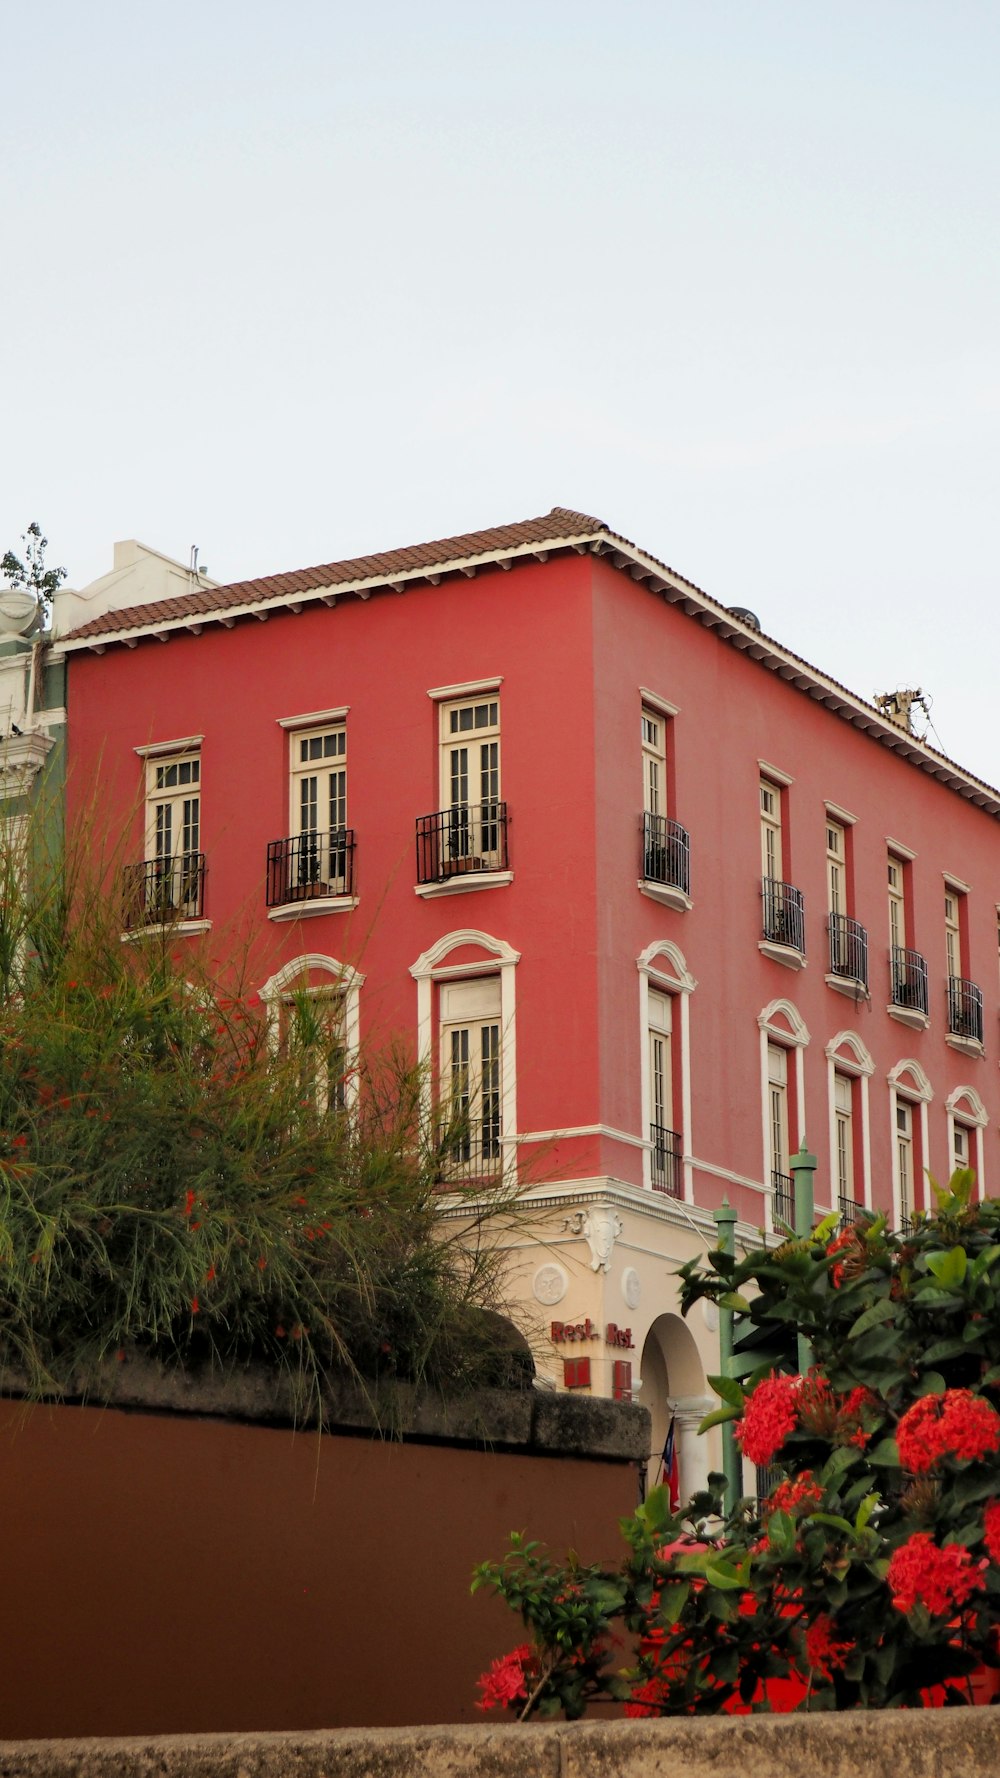 a red building with white windows and balconies